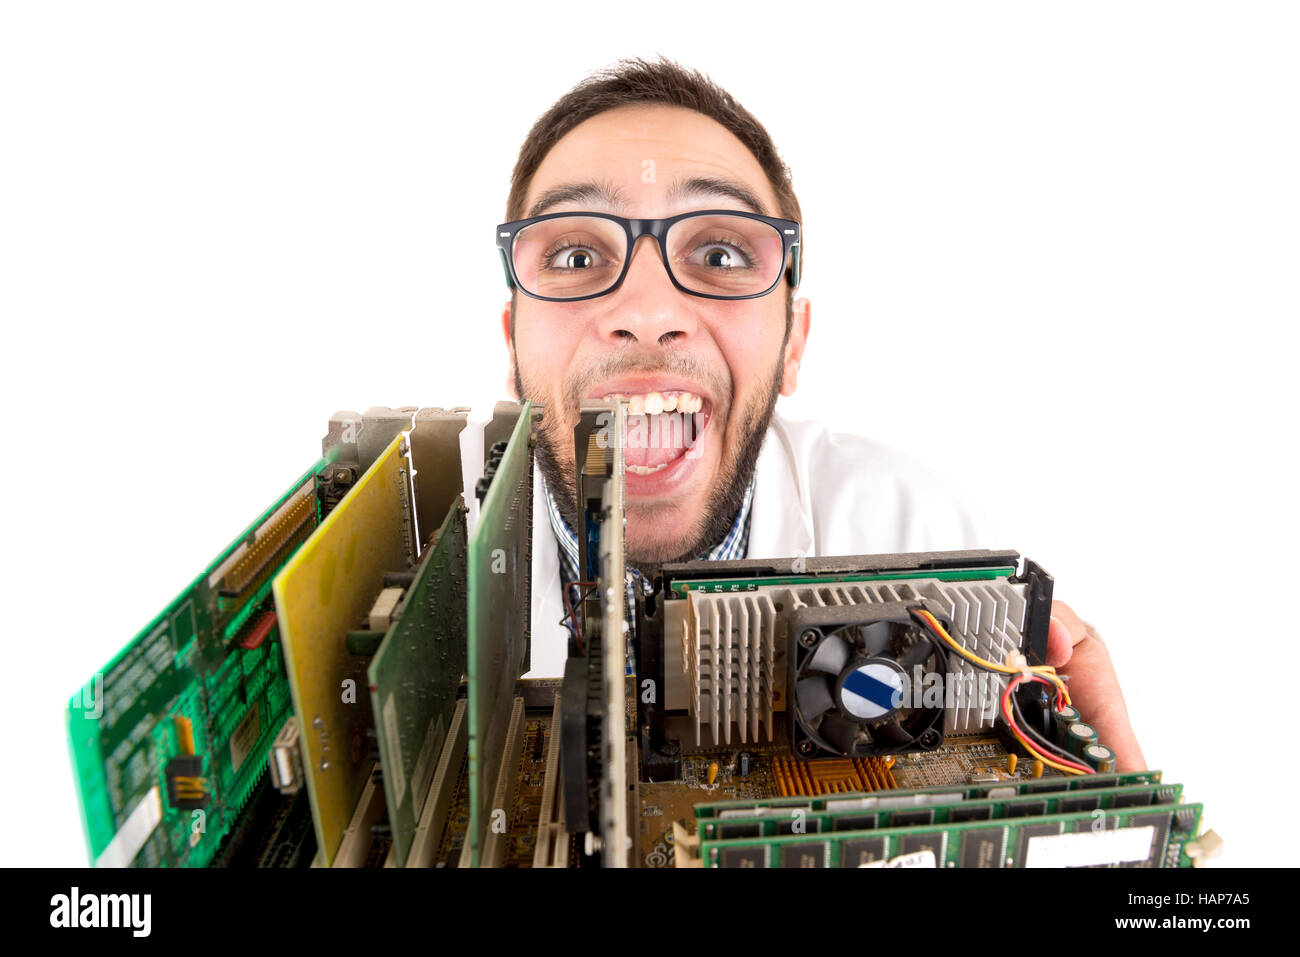 Nerd engineer posing with computer components isolated in a white background Stock Photo